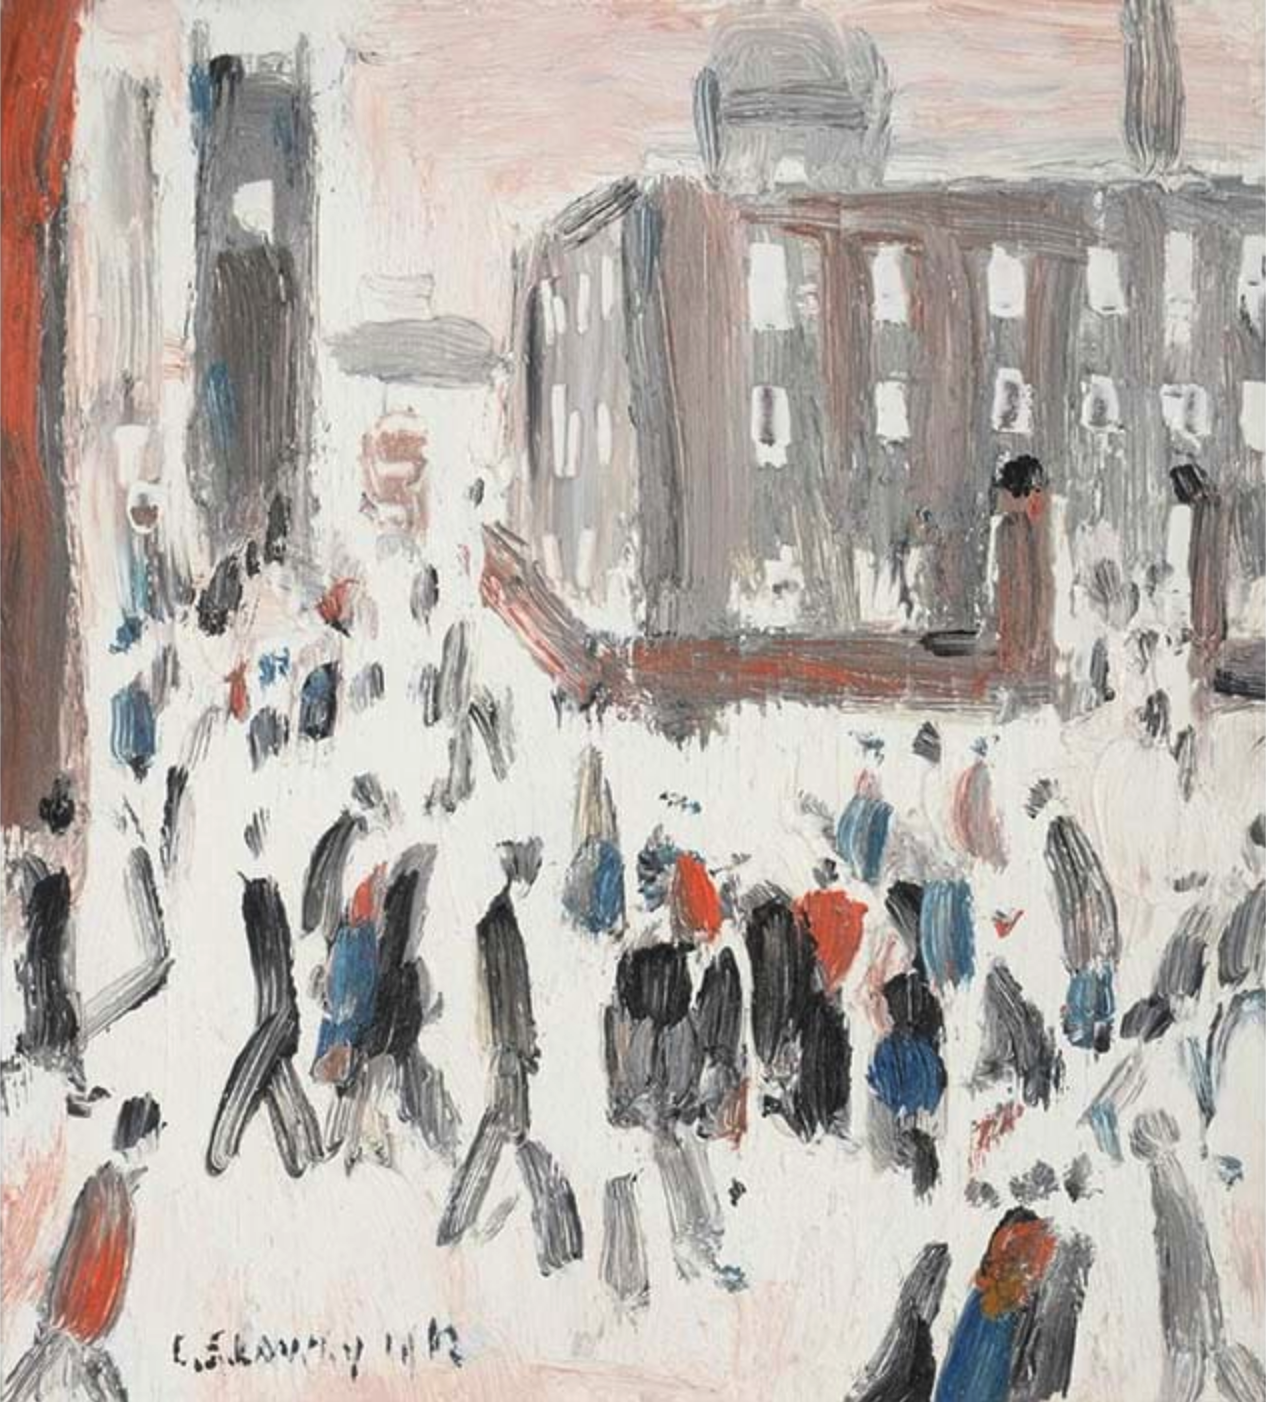 Street Scene, Factory Gates (1962) by Laurence Stephen Lowry (1887 - 1976), English artist.